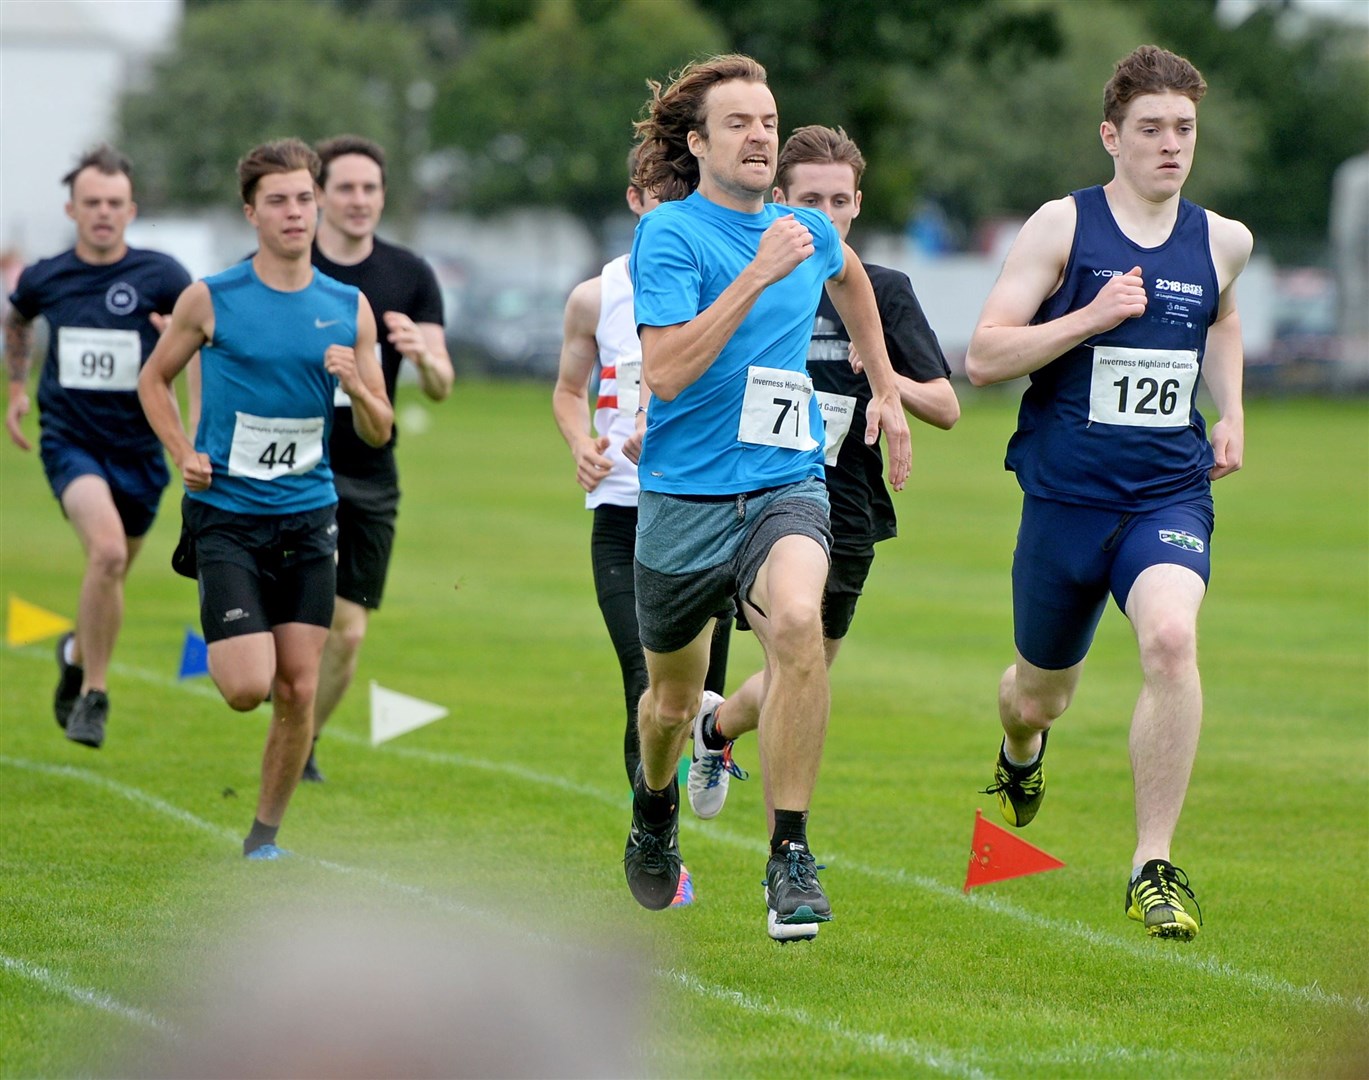 400m men's race at Inverness Highland Games.